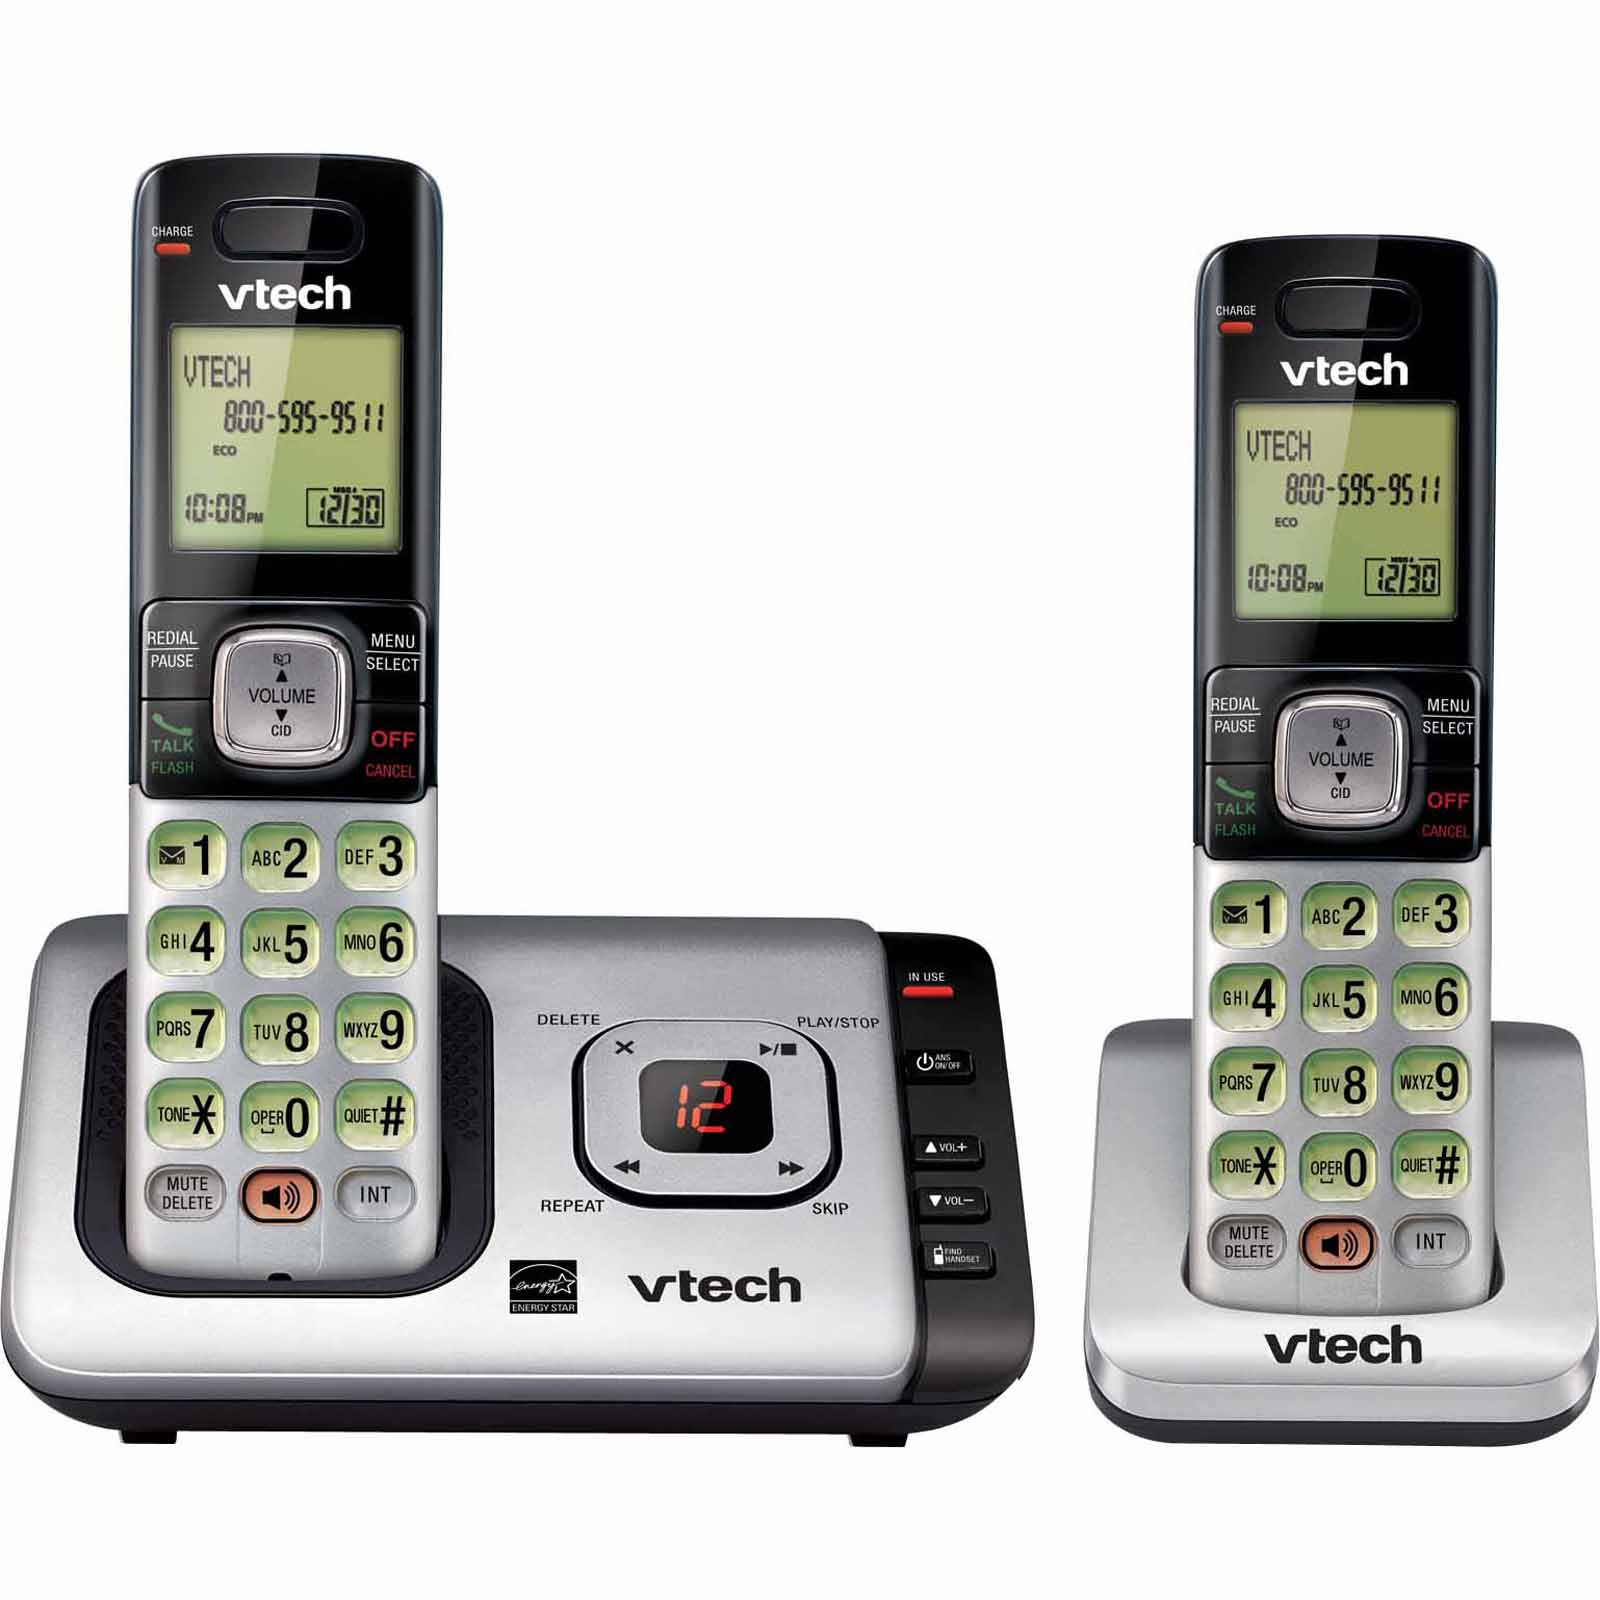 VTech CS6729-2 DECT 6.0 Expandable Cordless Phone with answering System & Caller ID/Call Waiting, 2 Handsets